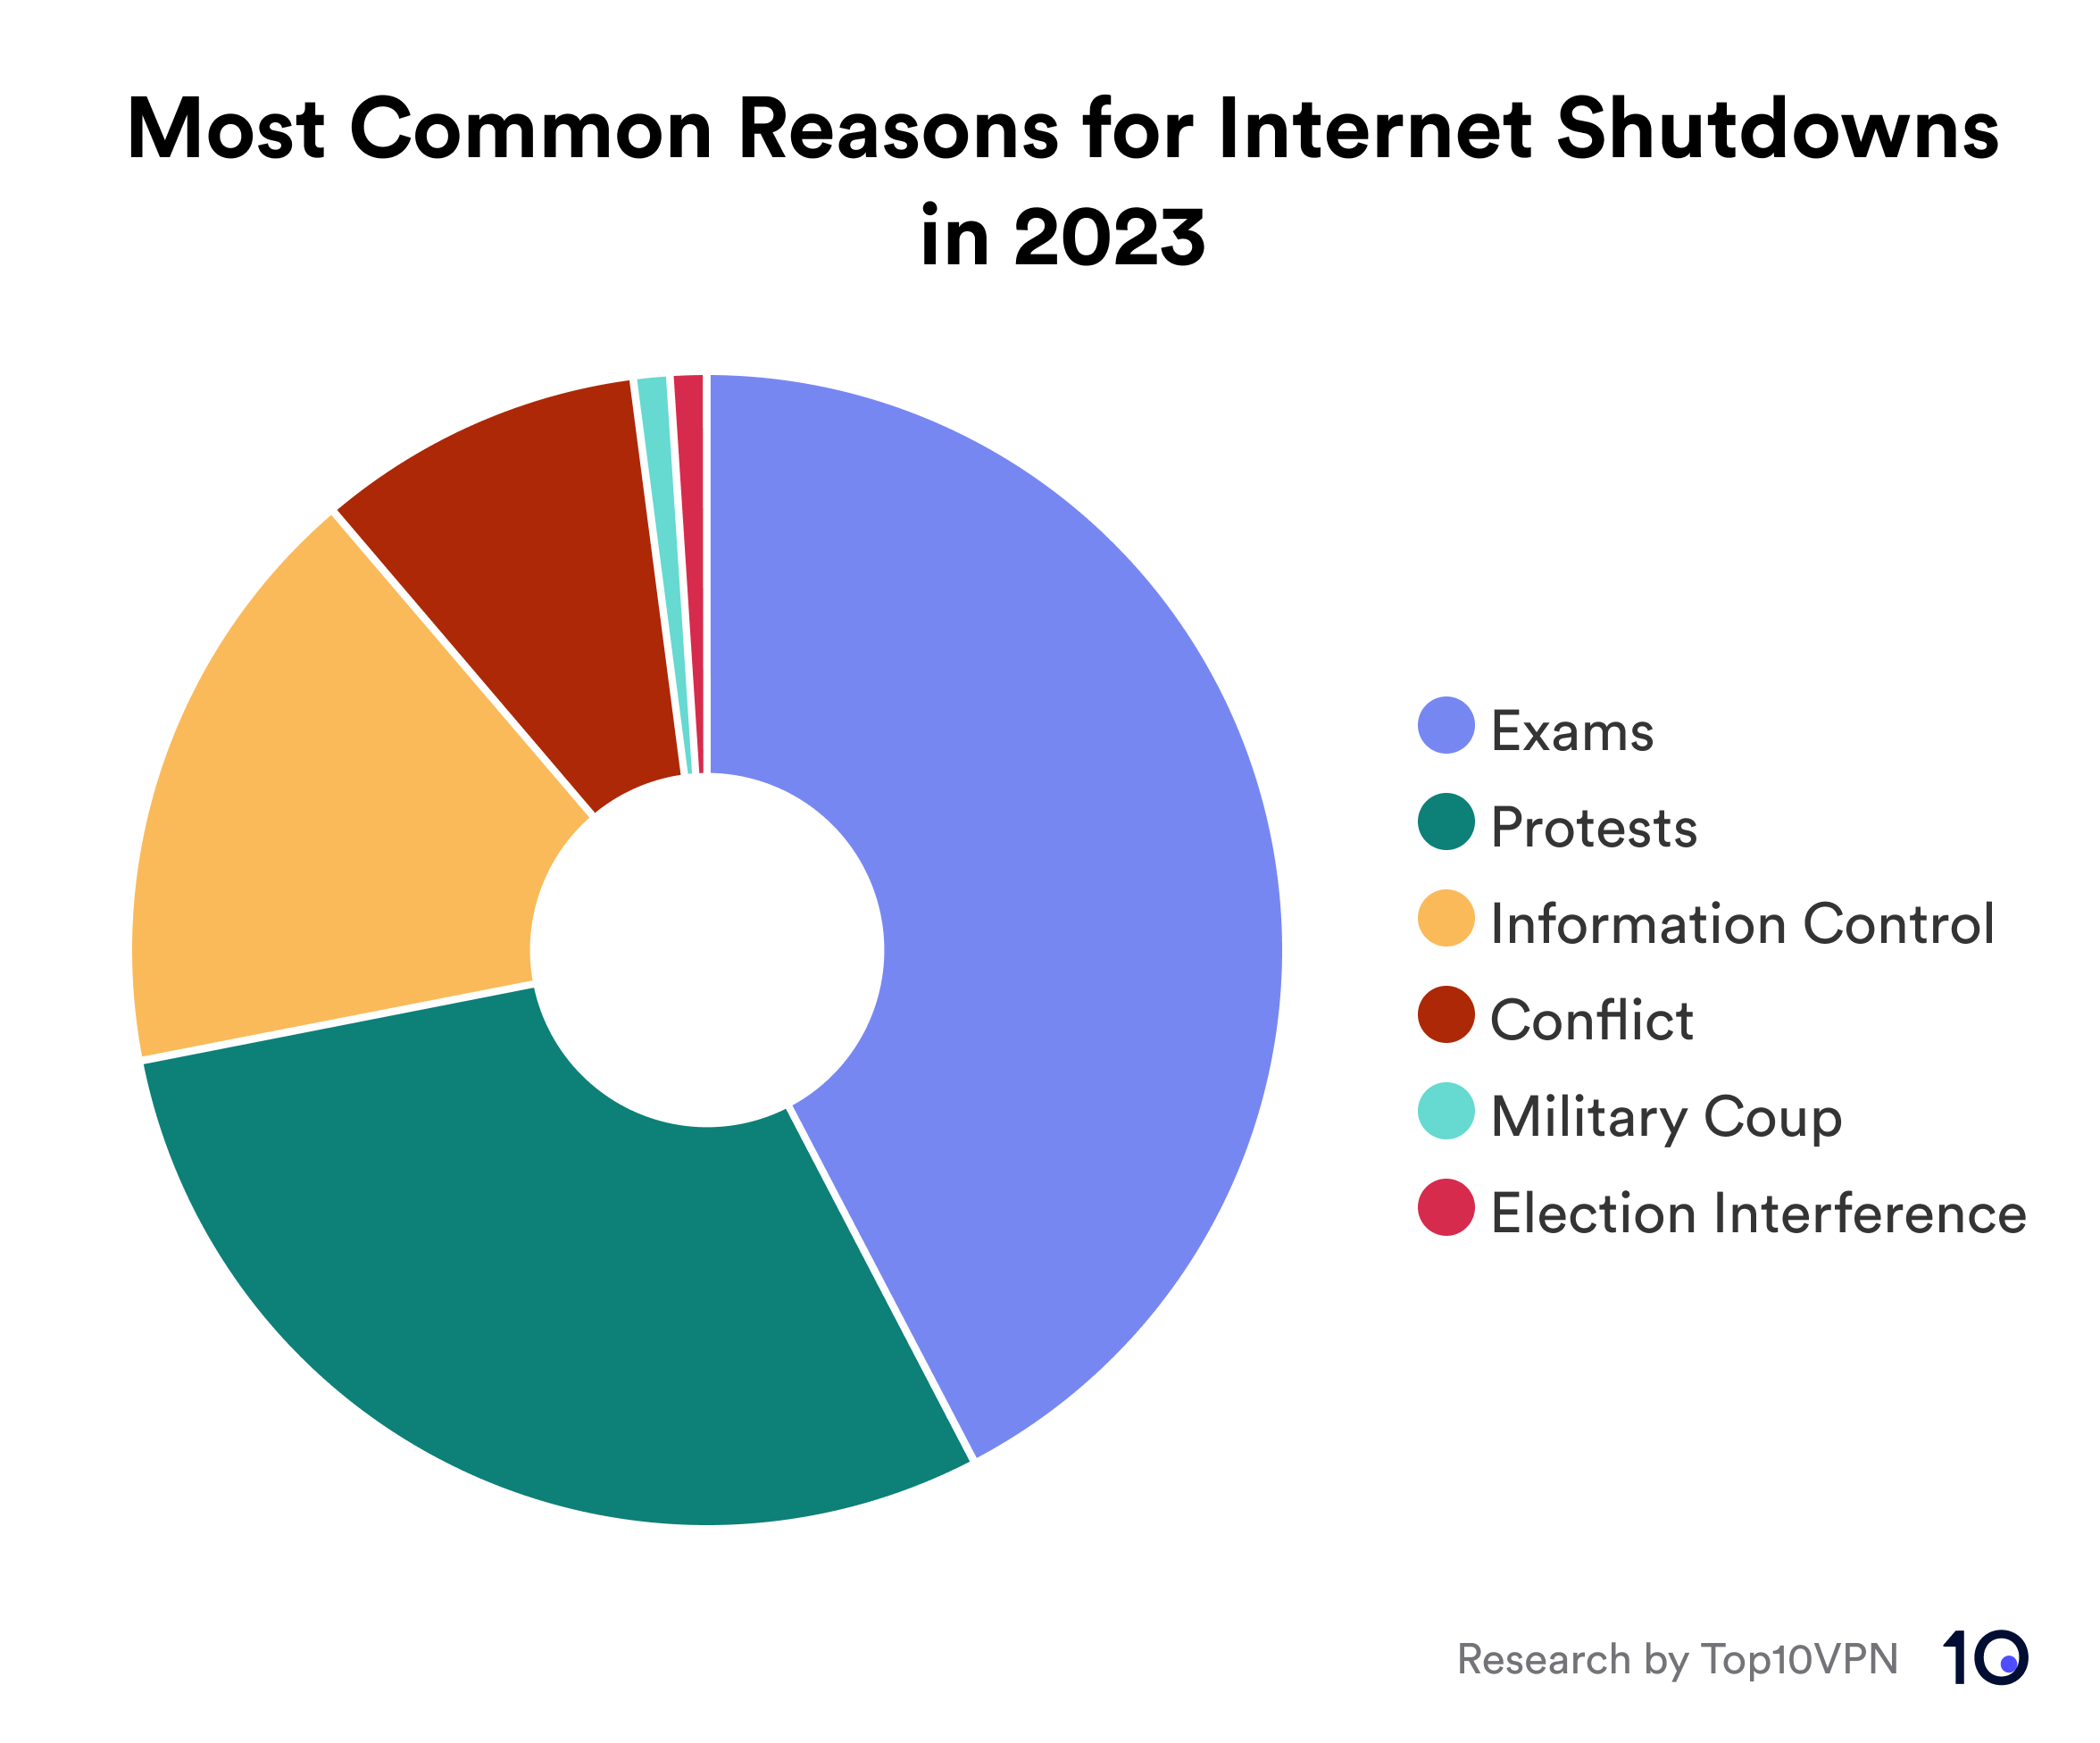 Donut chart showing the most common reasons for internet shutdowns in 2023